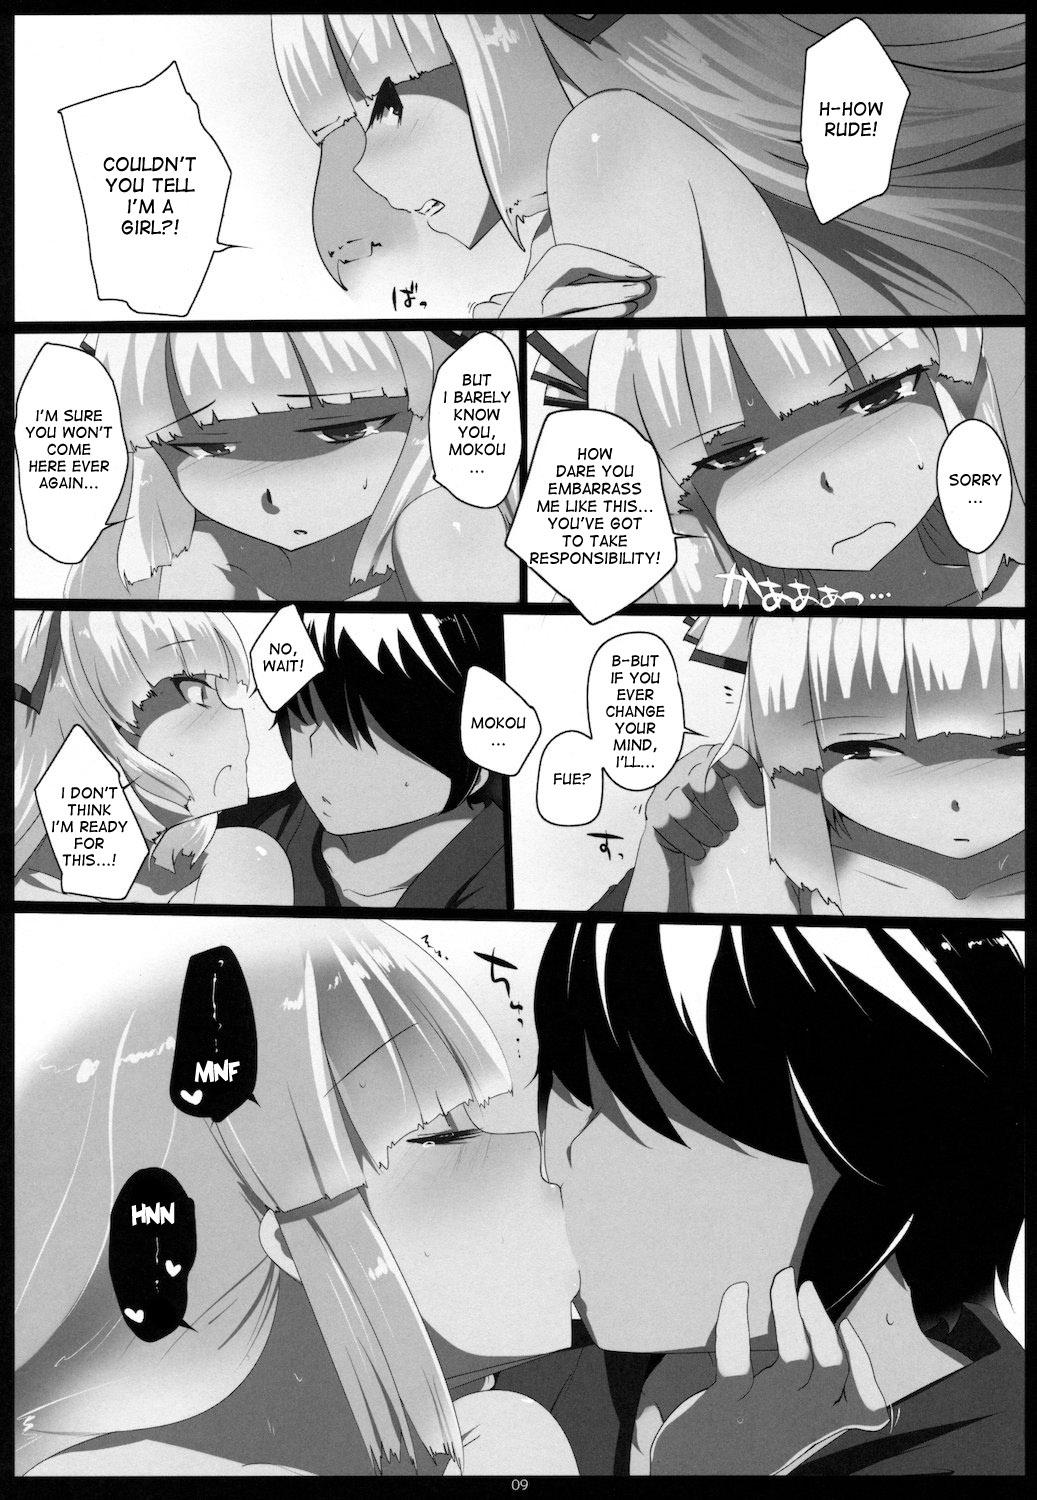 Missionary Position Porn Touhou Dere Bitch 7 - Touhou project Young Petite Porn - Page 9